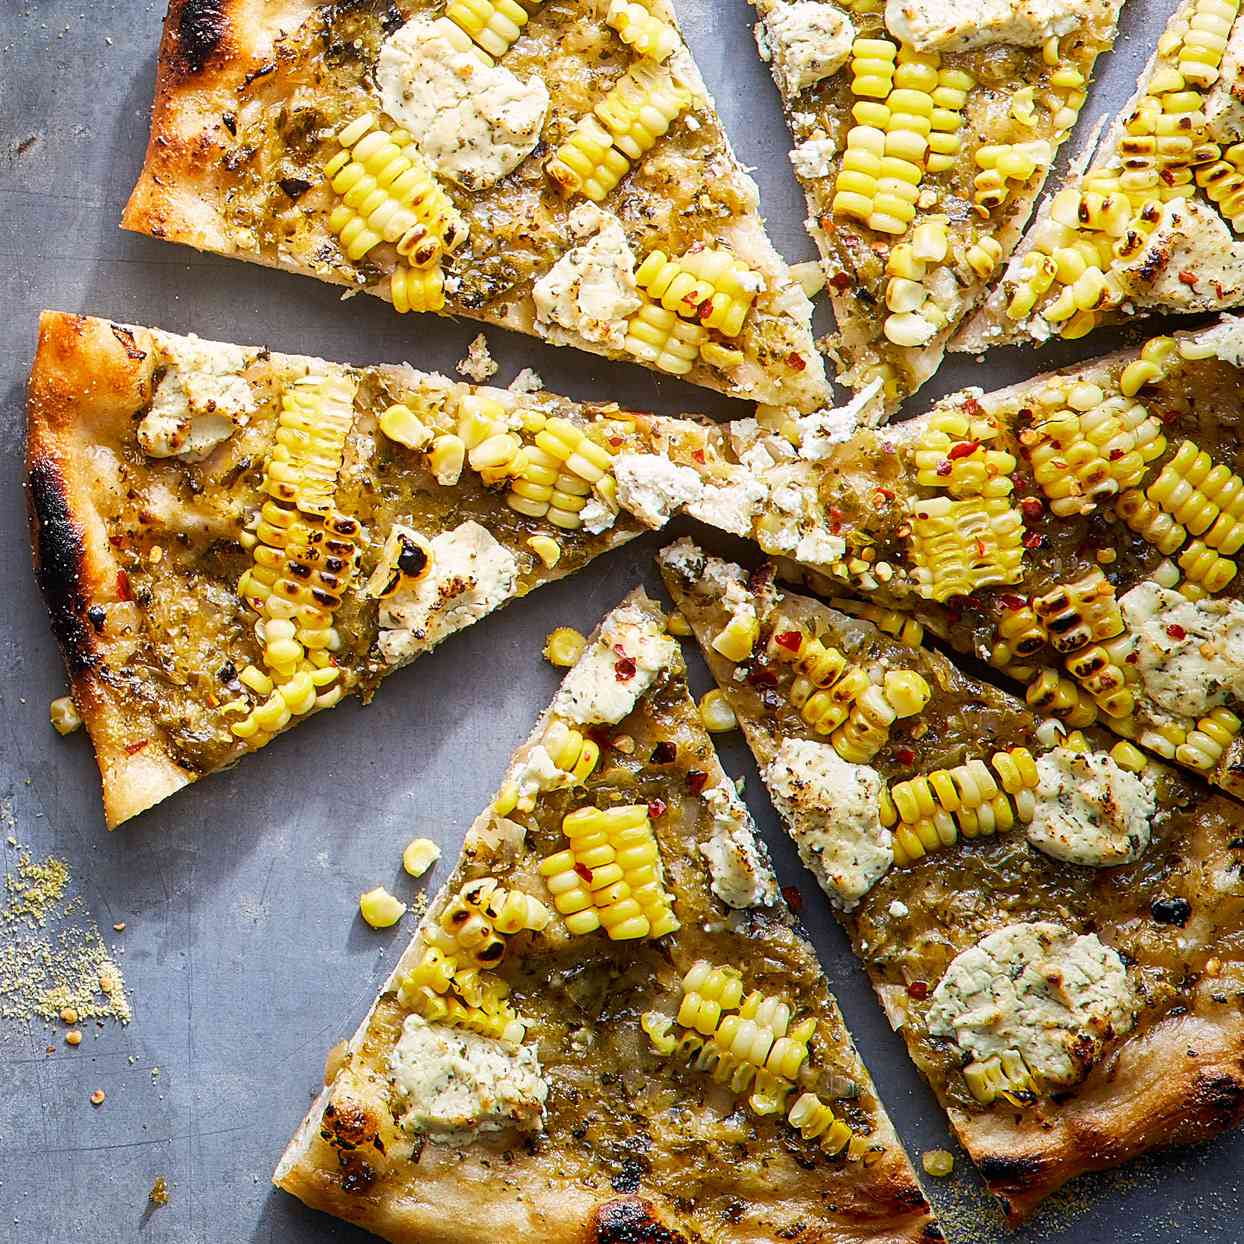 <p>When life leaves you one lonely ear of sweet corn, make this pizza, topped with green salsa, corn and goat cheese. It's a favorite at Millsap Farm's Pizza Club parties in Springfield, Missouri.</p>
                          <p> 
                          Related: Homemade Pizza Recipes</p>
                          